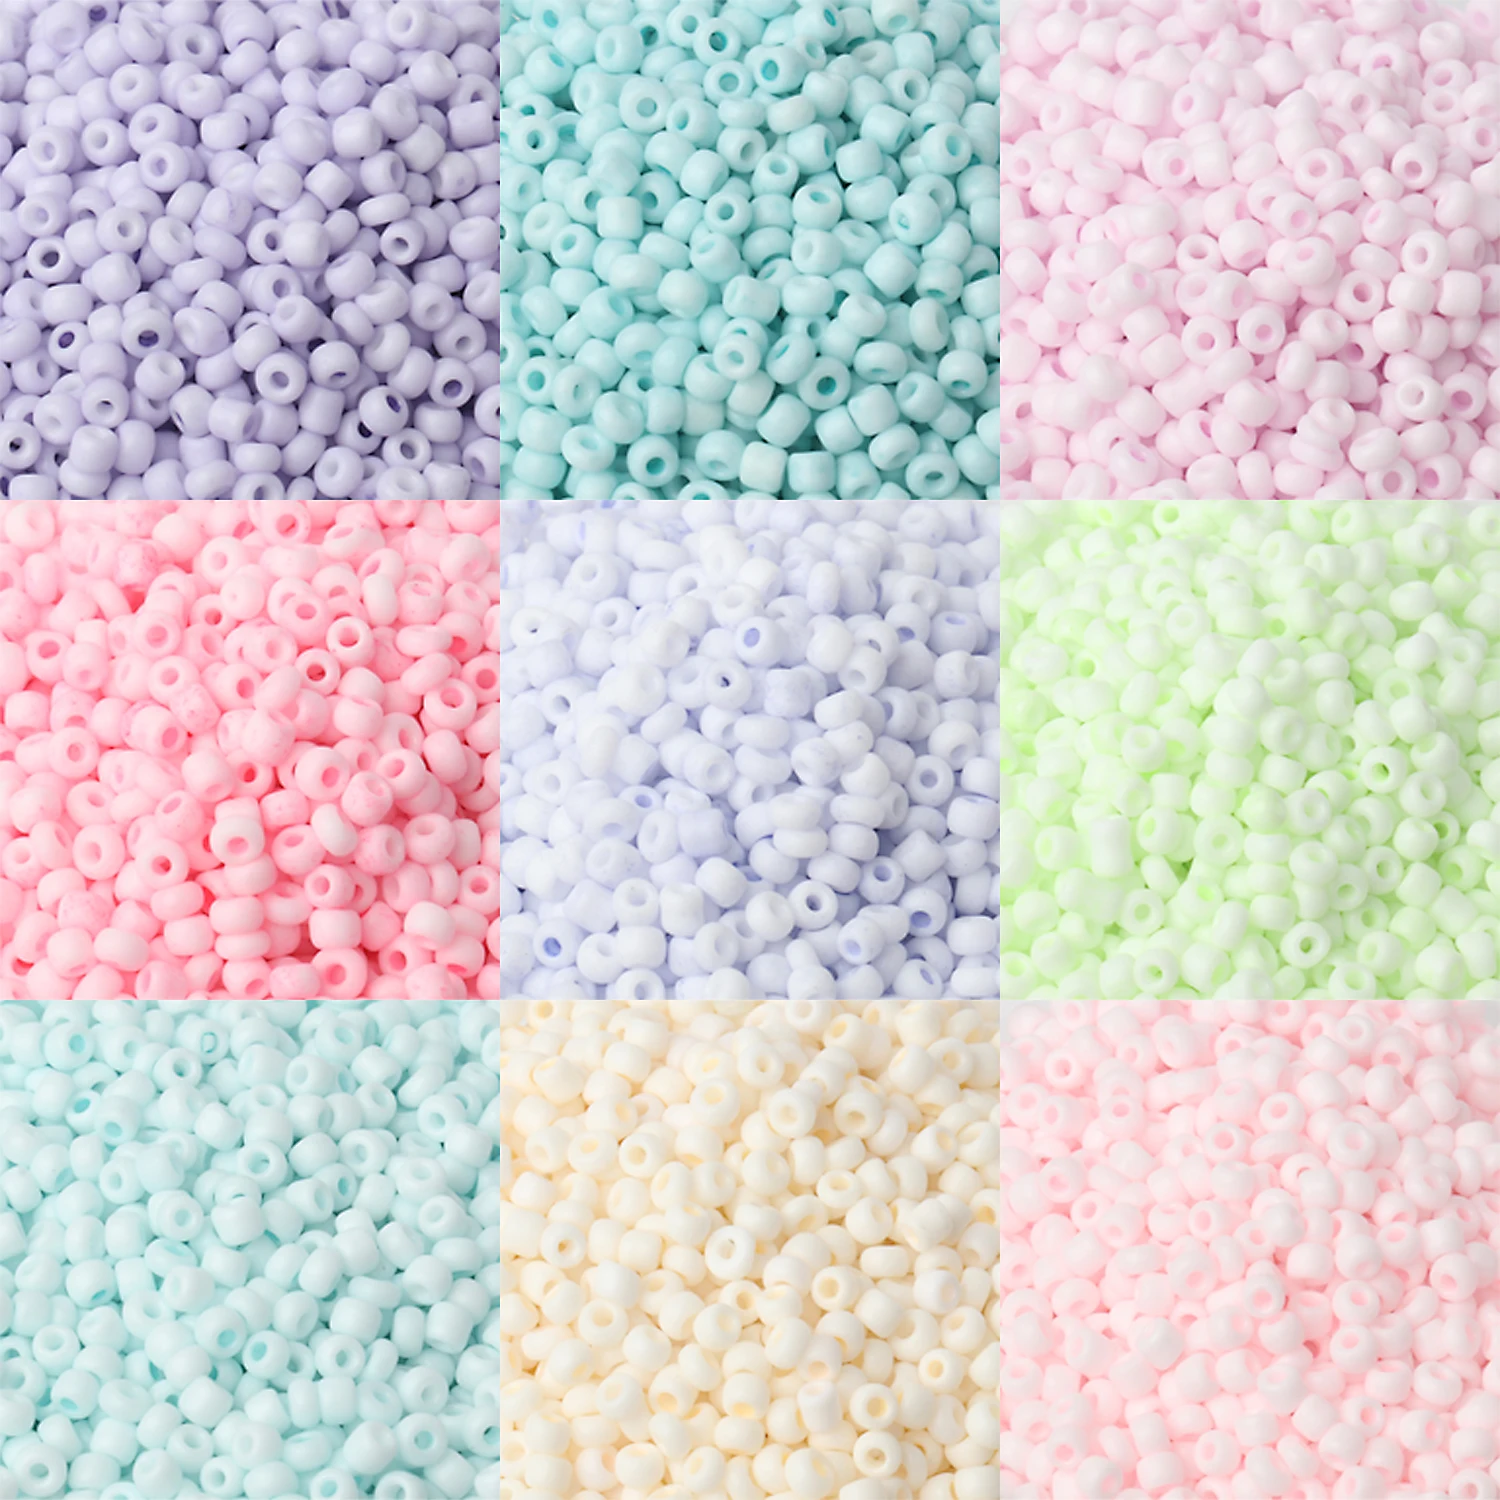 15g 3mm Matte Macaroon Color Glass Seed Beads 8/0 Uniform Round Spacer Beads For DIY Handmade Jewelry Making Accessories 500pcs